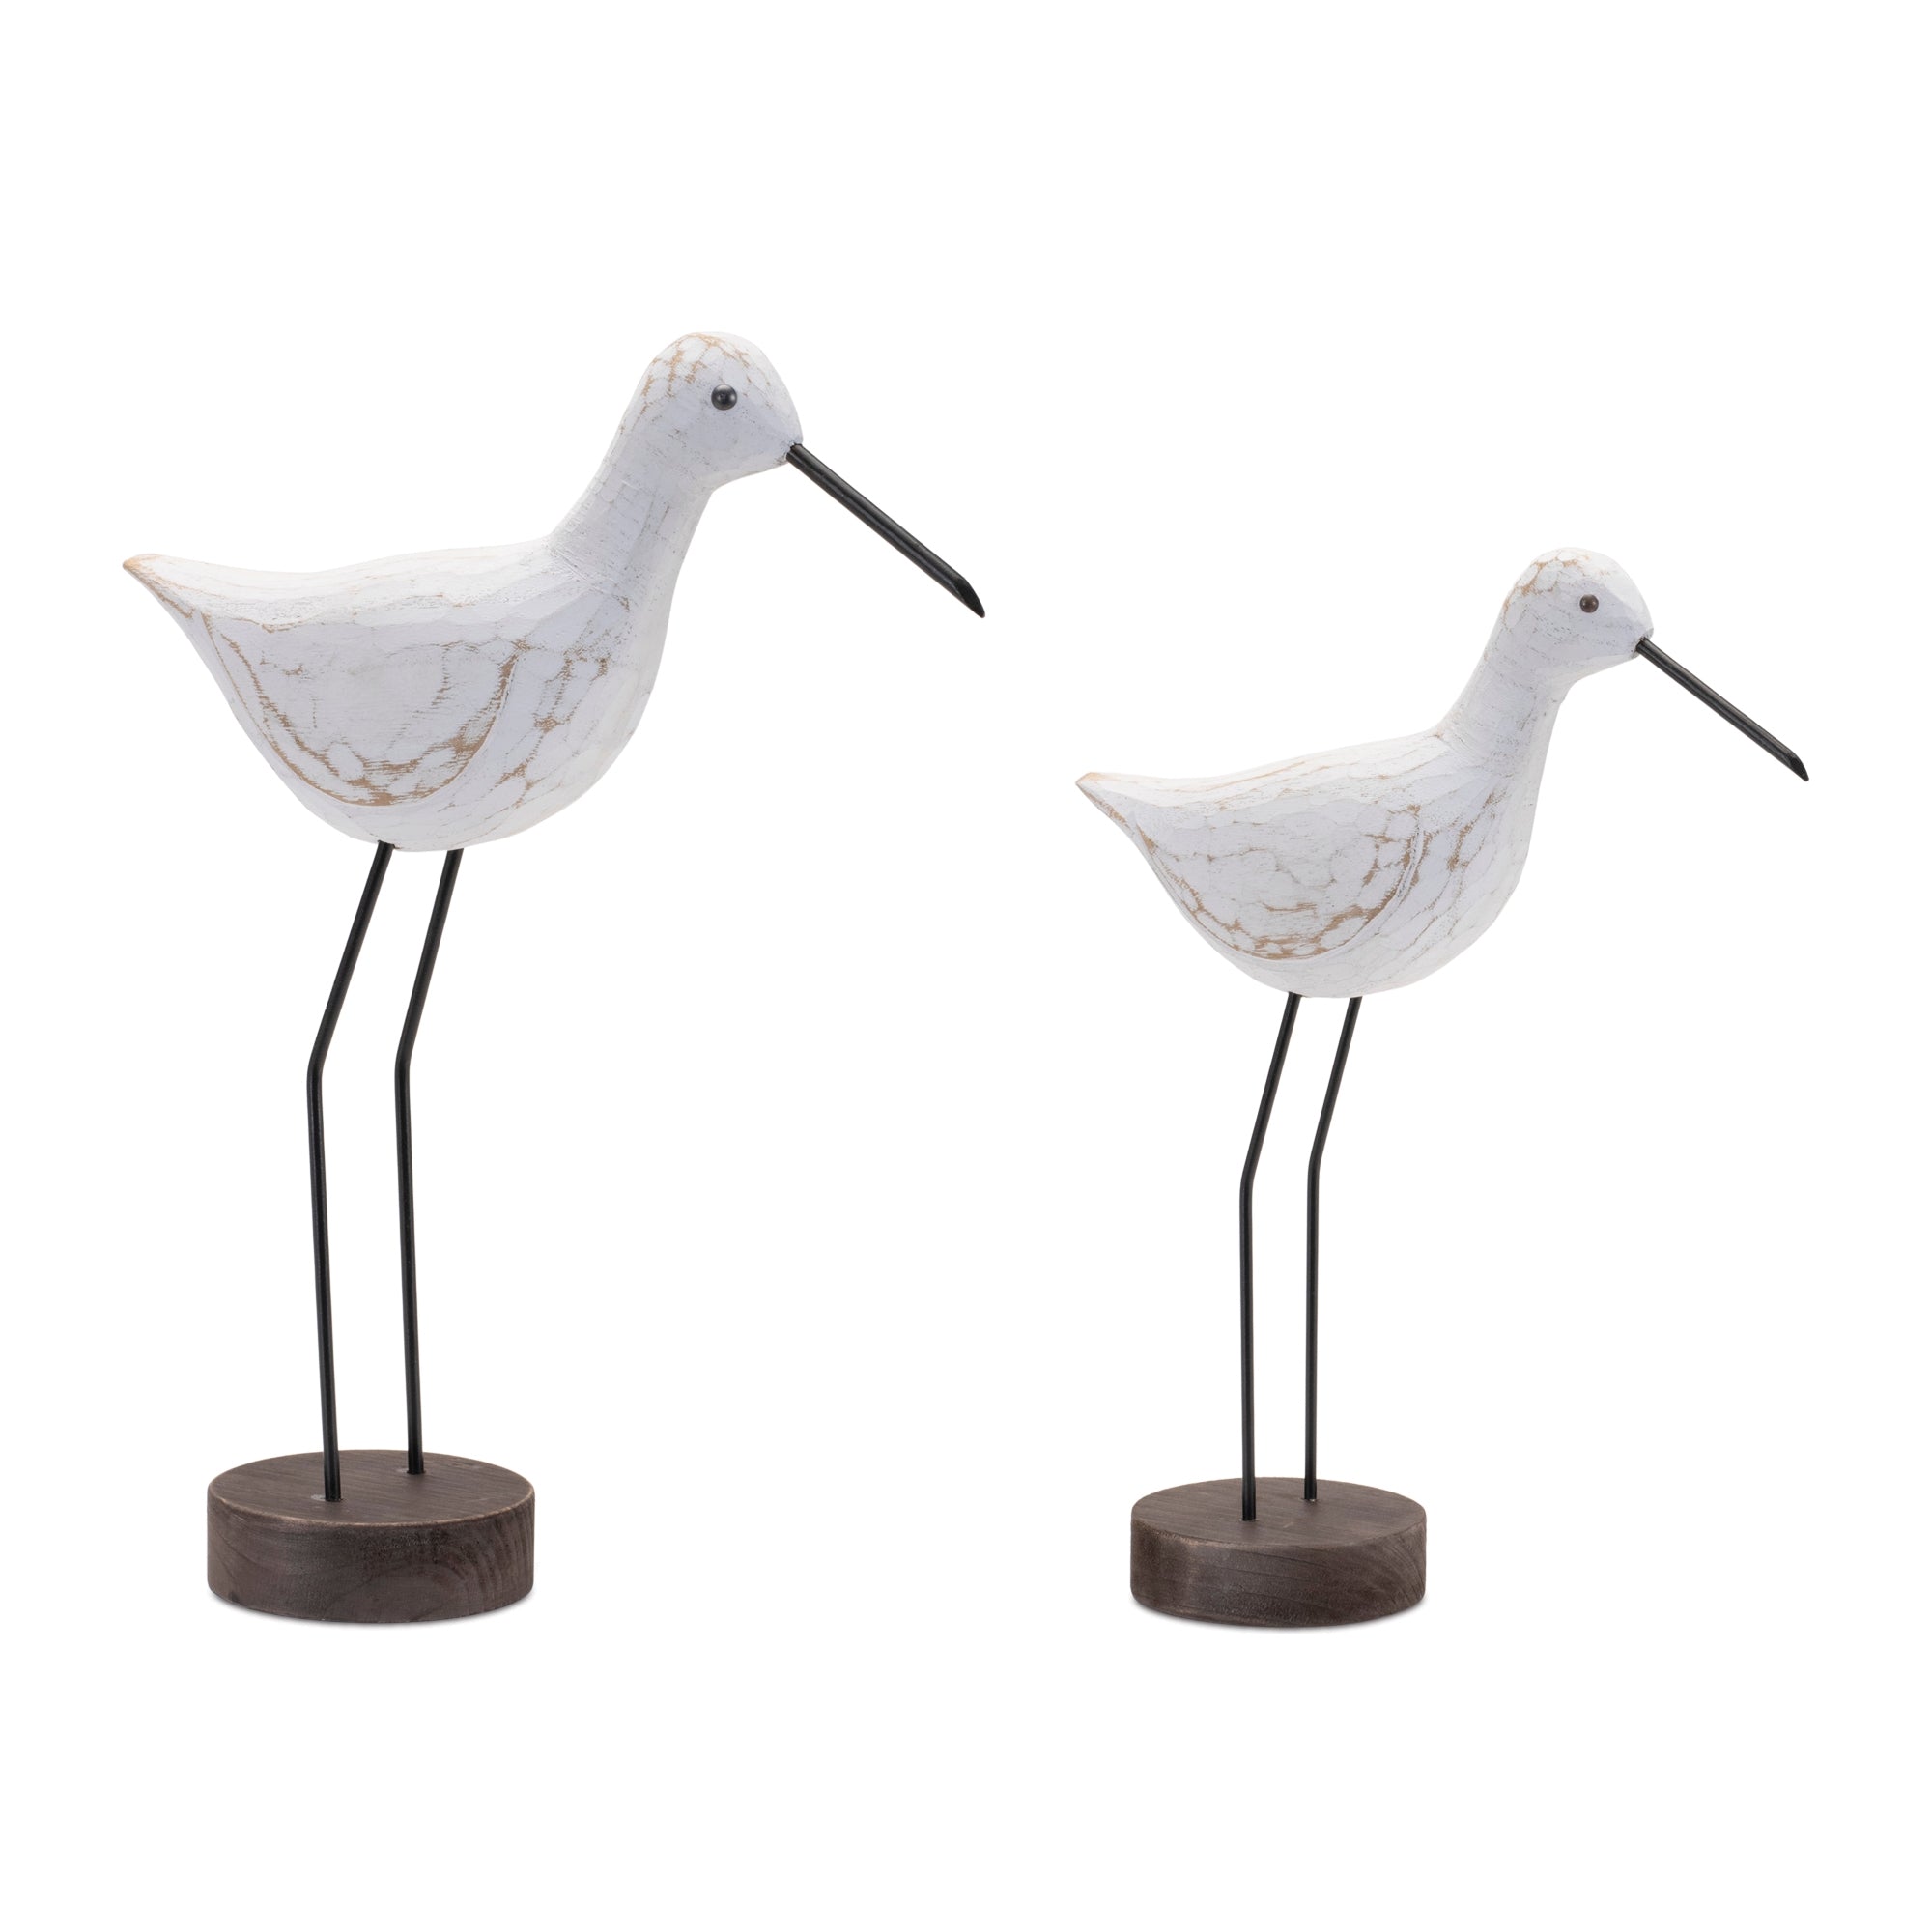 Carved Wood Sea Bird with Metal Stand (Set of 2)